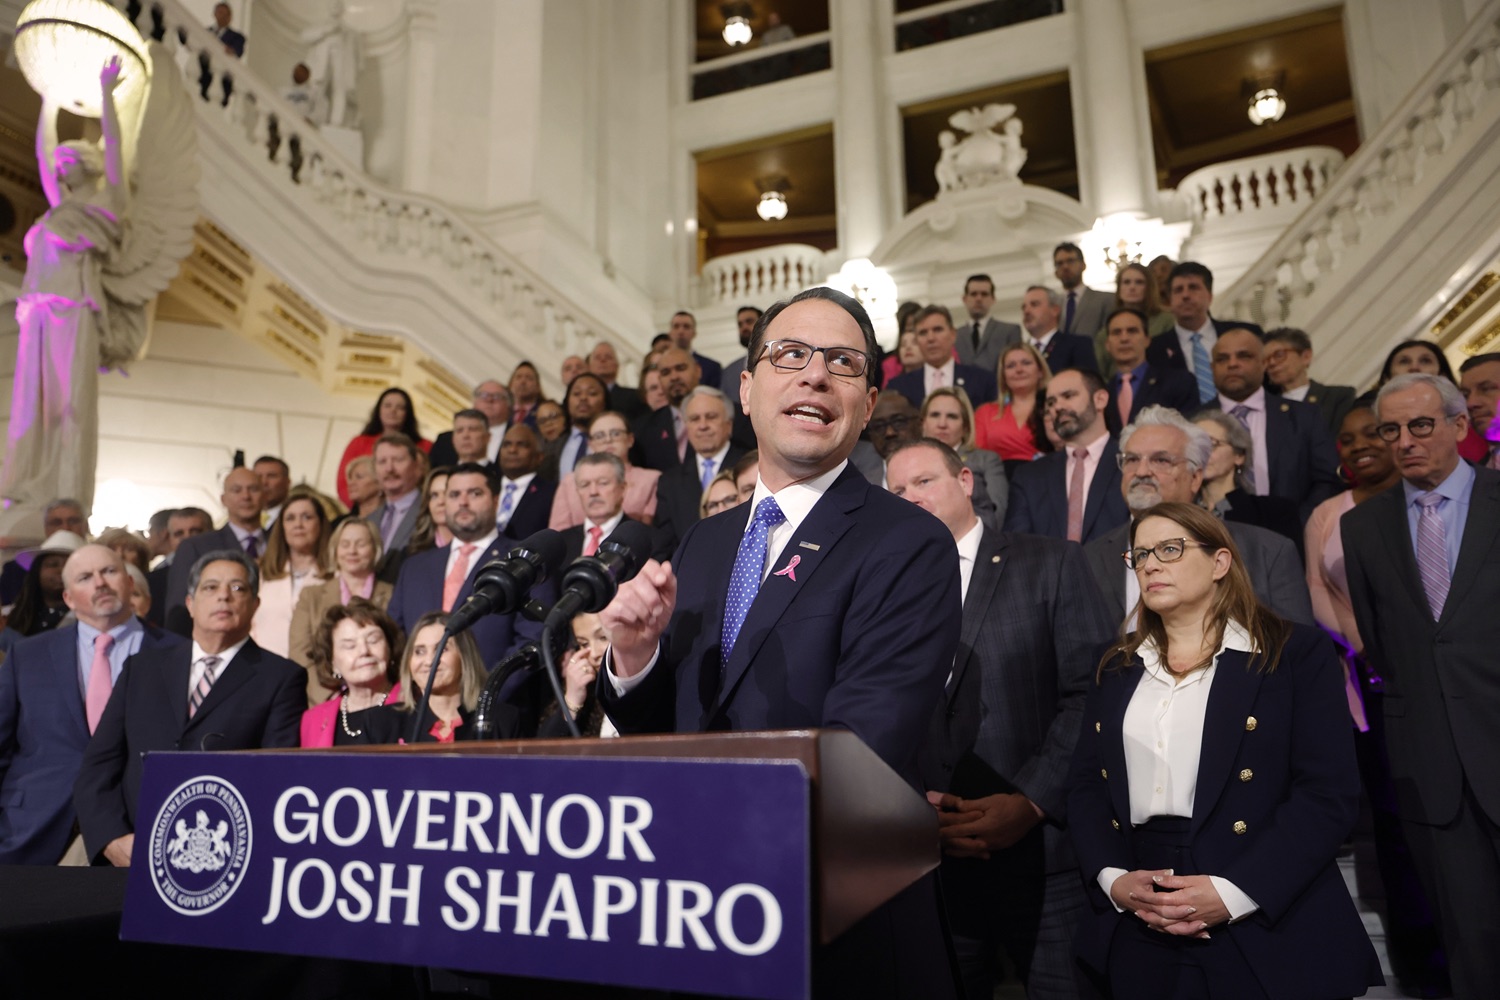 Governor Josh Shapiro signed the first bill of his Administration - Act 1 of 2023, a first-of-its-kind law in the nation that will require insurers to cover preventive breast and ovarian cancer screenings for high-risk women at no cost. MAY 01, 2023 - HARRISBURG, PA<br><a href="https://filesource.amperwave.net/commonwealthofpa/photo/23041_gov_sb8_dz_004.JPG" target="_blank">⇣ Download Photo</a>